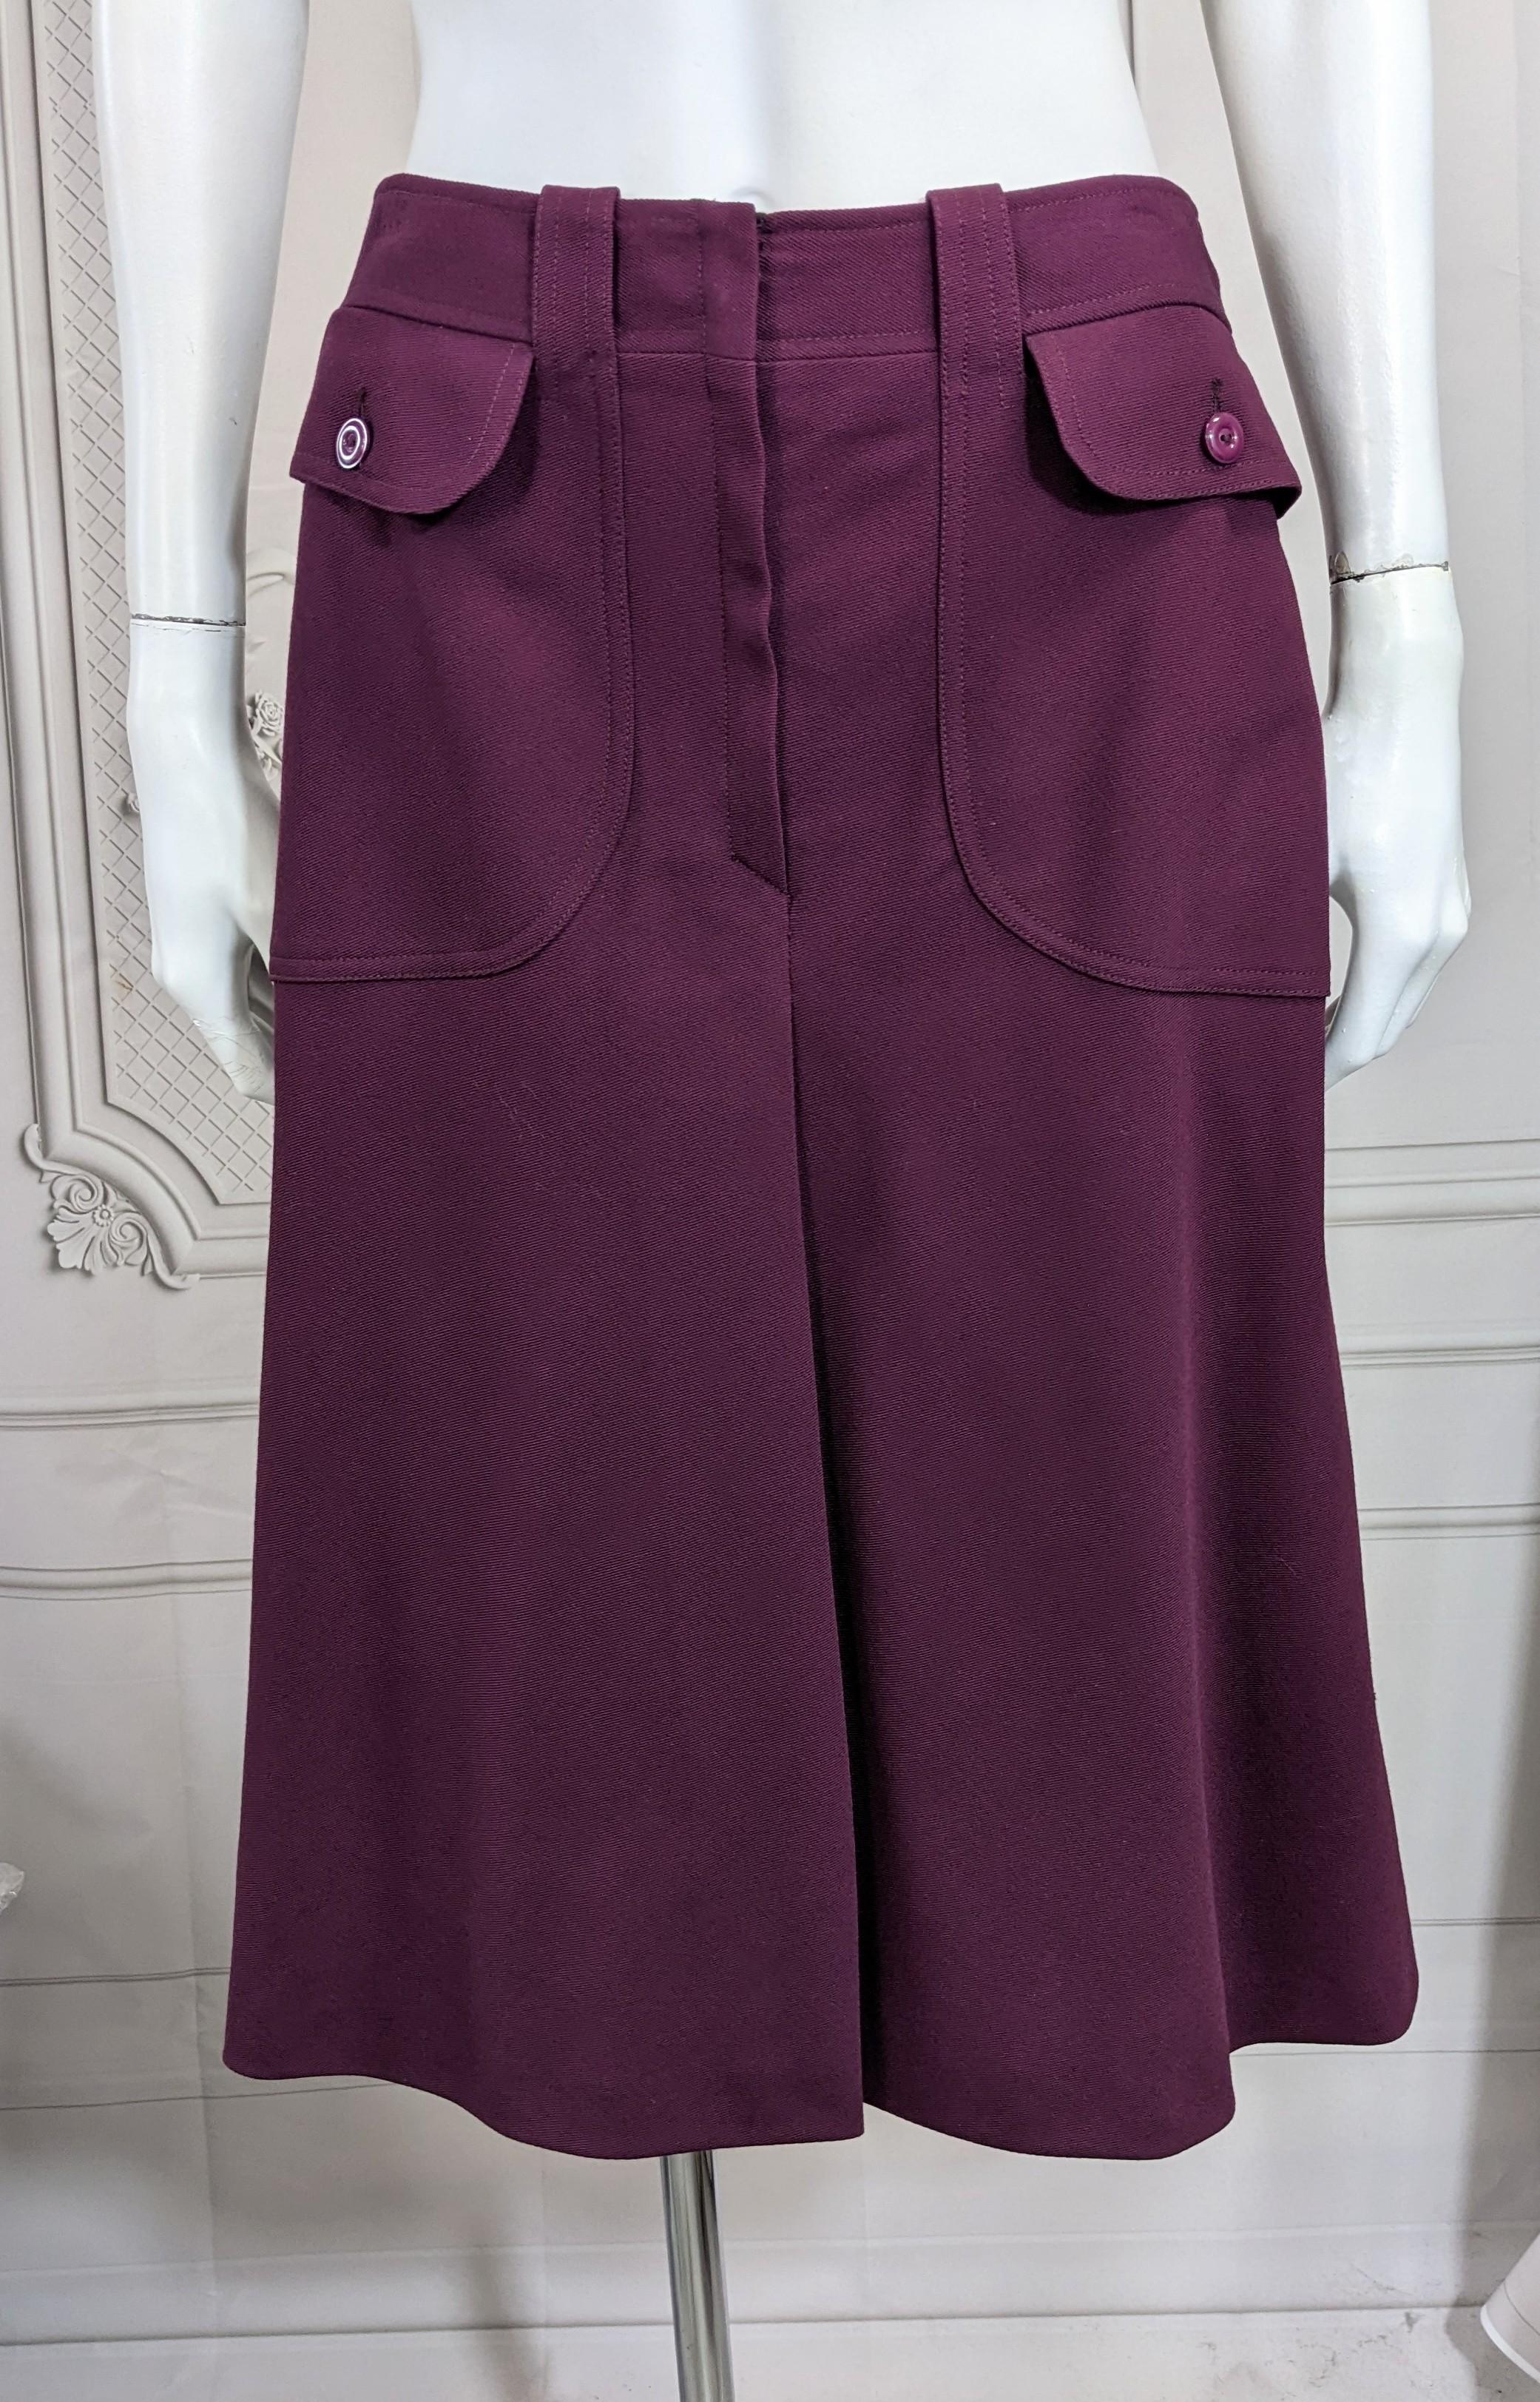 Charming Cacharel Wool Twill A Line Skirt from the 1970's. Burgundy wool twill bias cut A line shape with pockets and shaped waistband. Fuller cut in back with center pleat. 1970's France. 
Vintage size 10, fits like a Modern 2. Waist 26